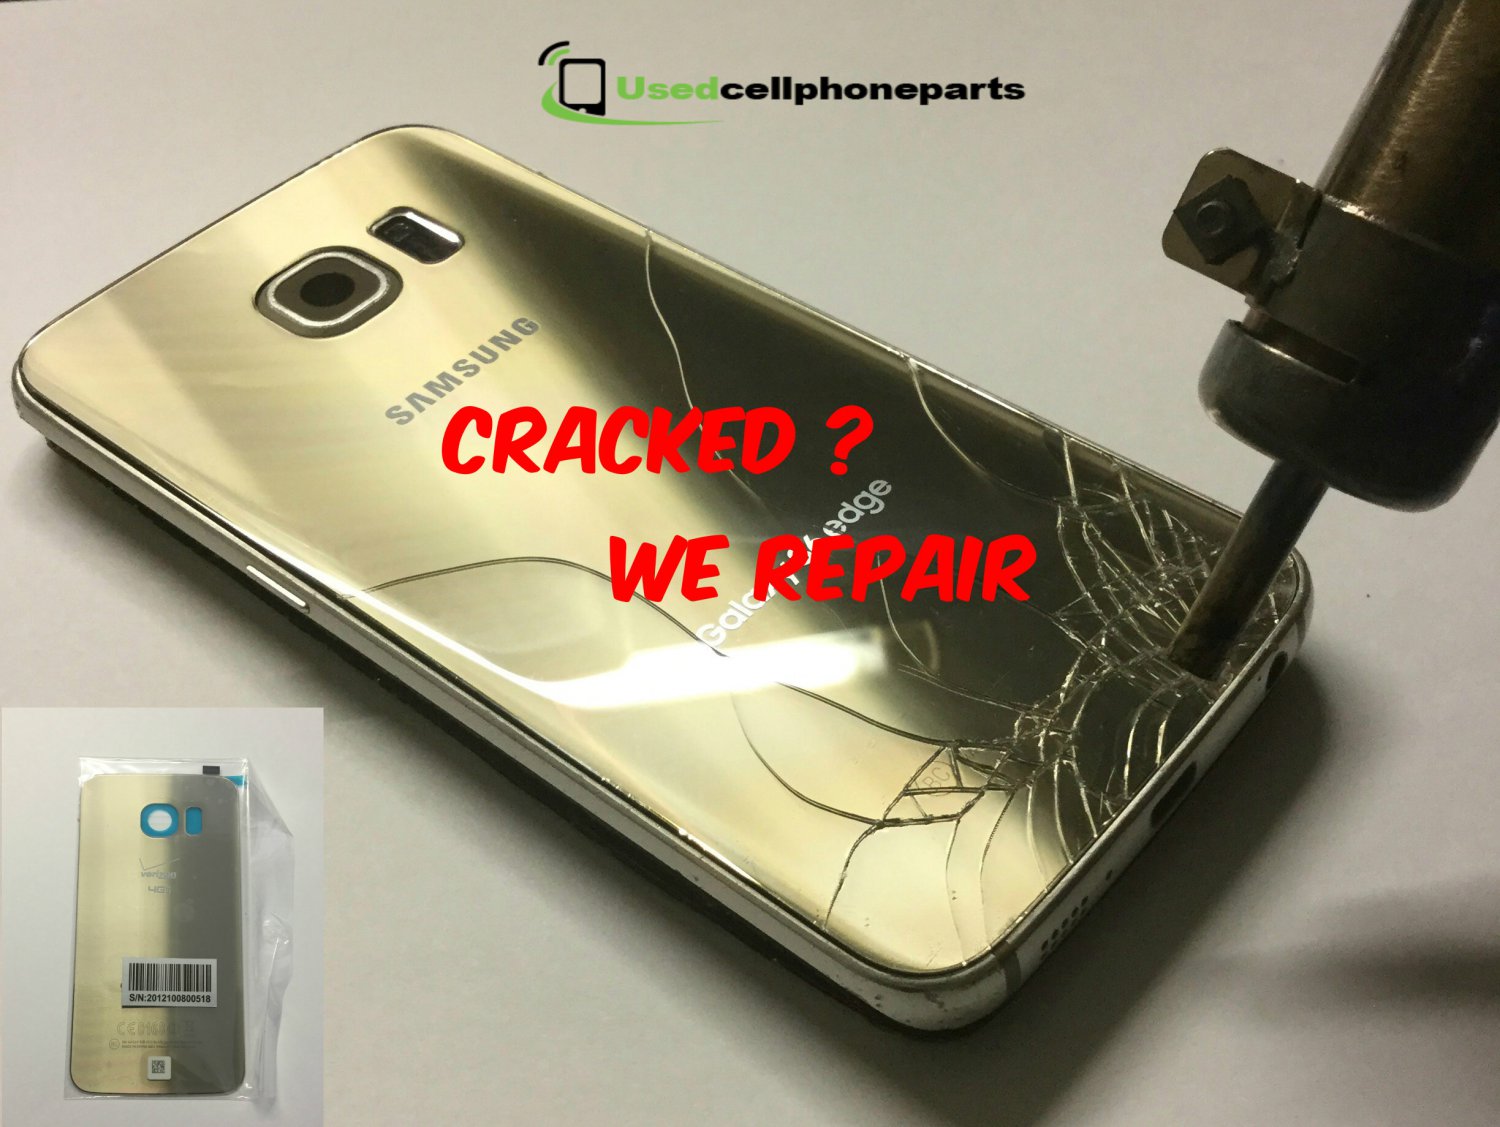 New OEM Samsung Galaxy S6 Battery Cover Door Replacement Repair Service